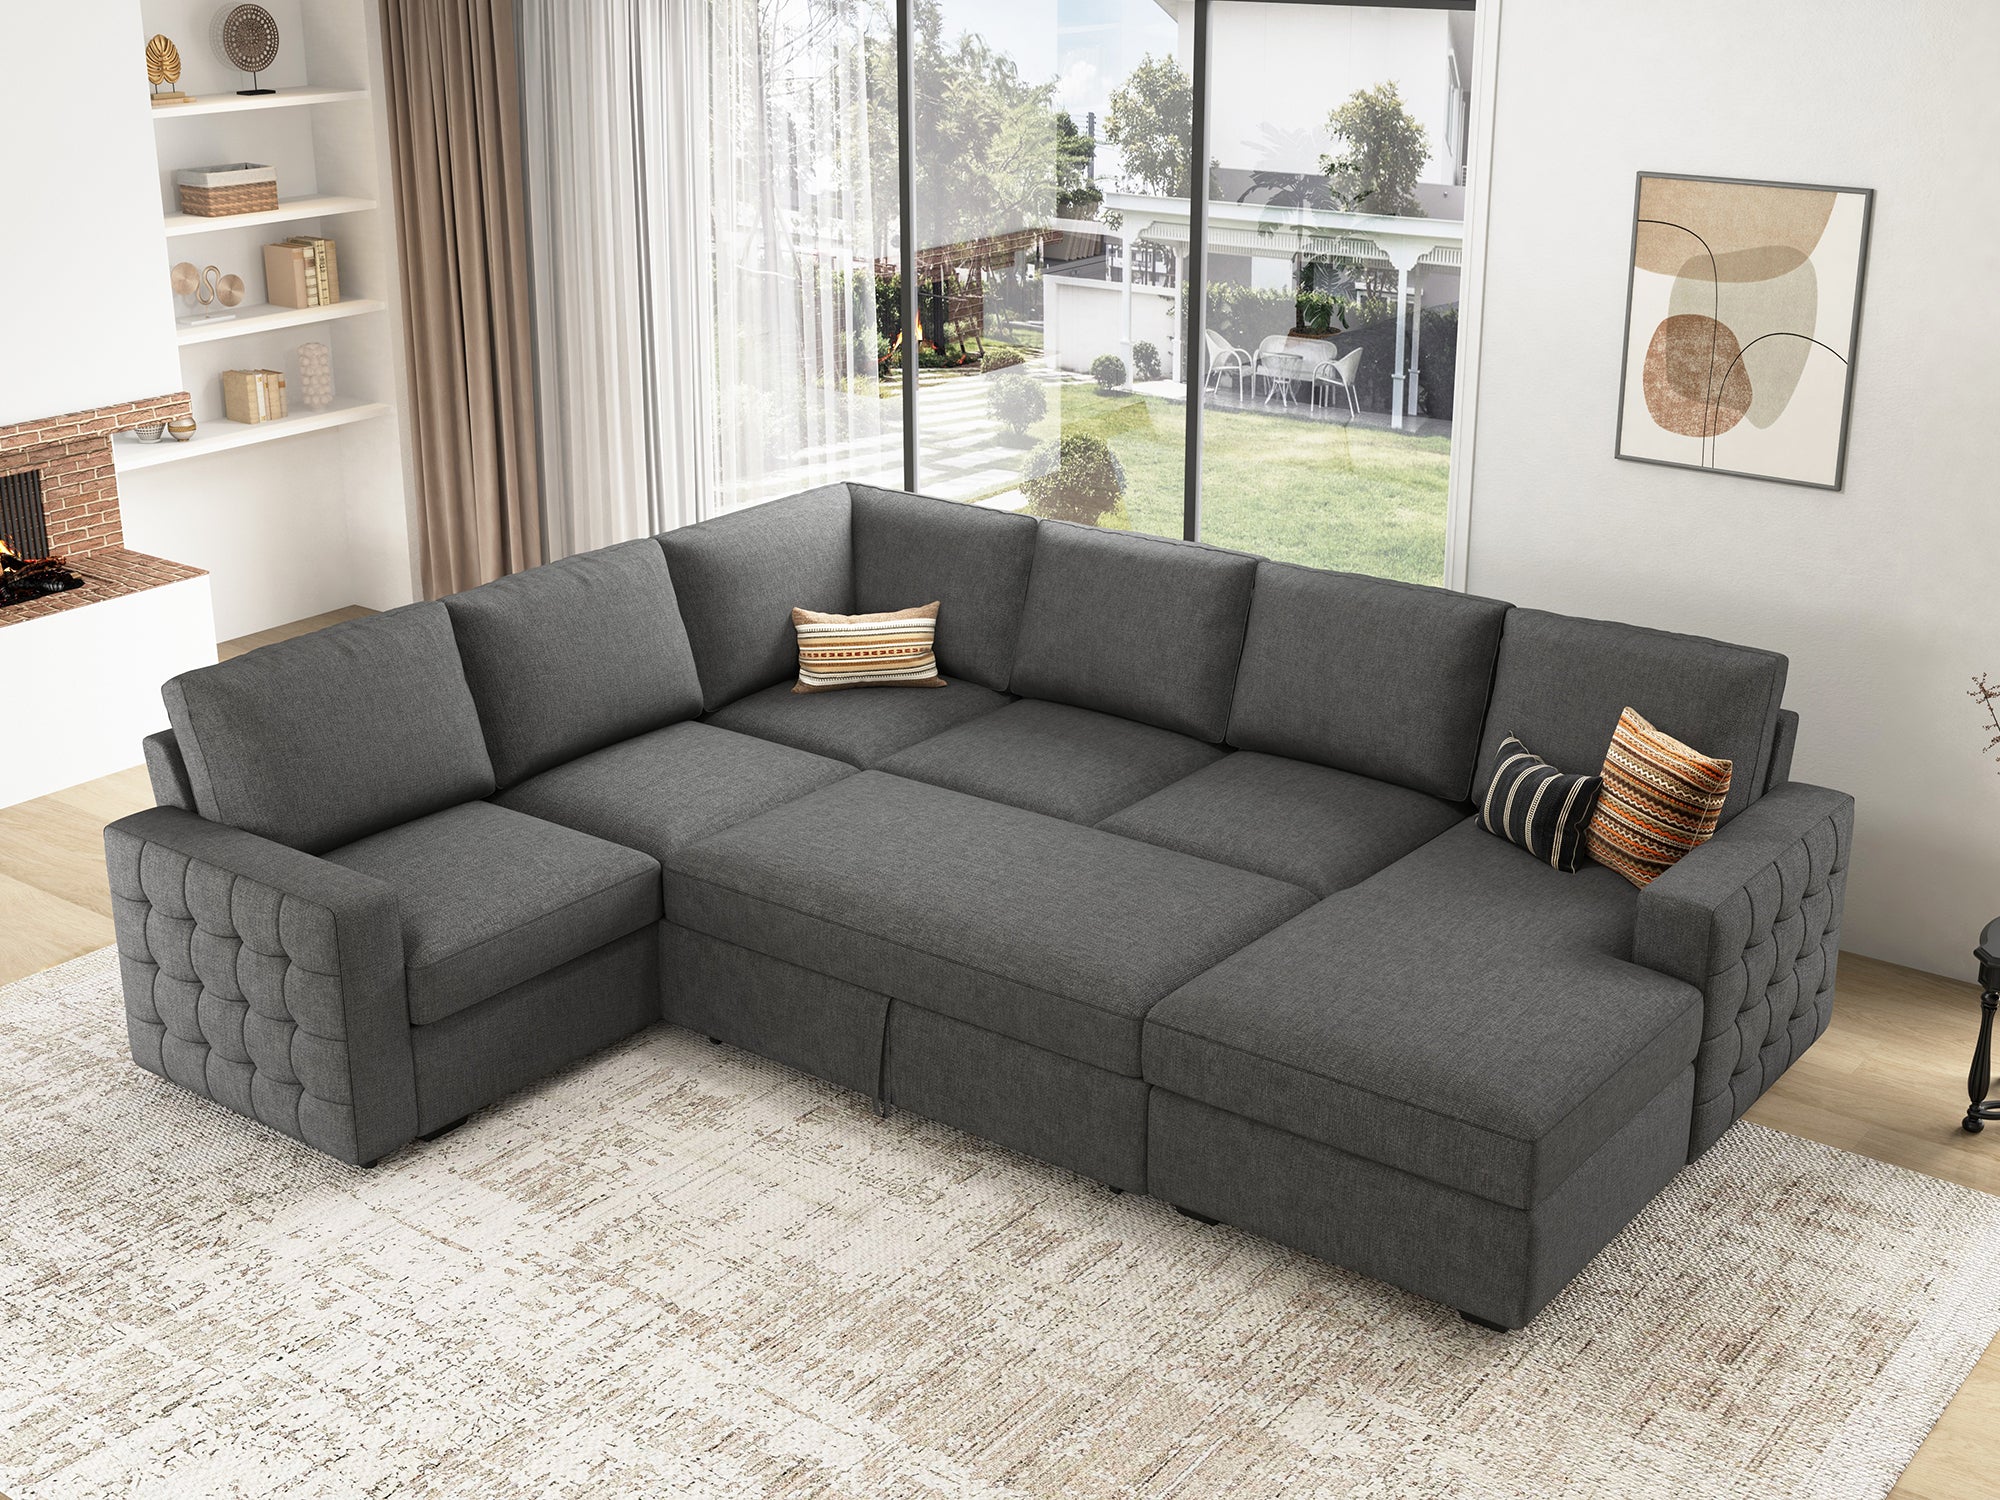 HONBAY 6-Seat U-Shaped Sectional Sofa Bed Sleeper Couch with Pull Out Bed & Storage Chaise